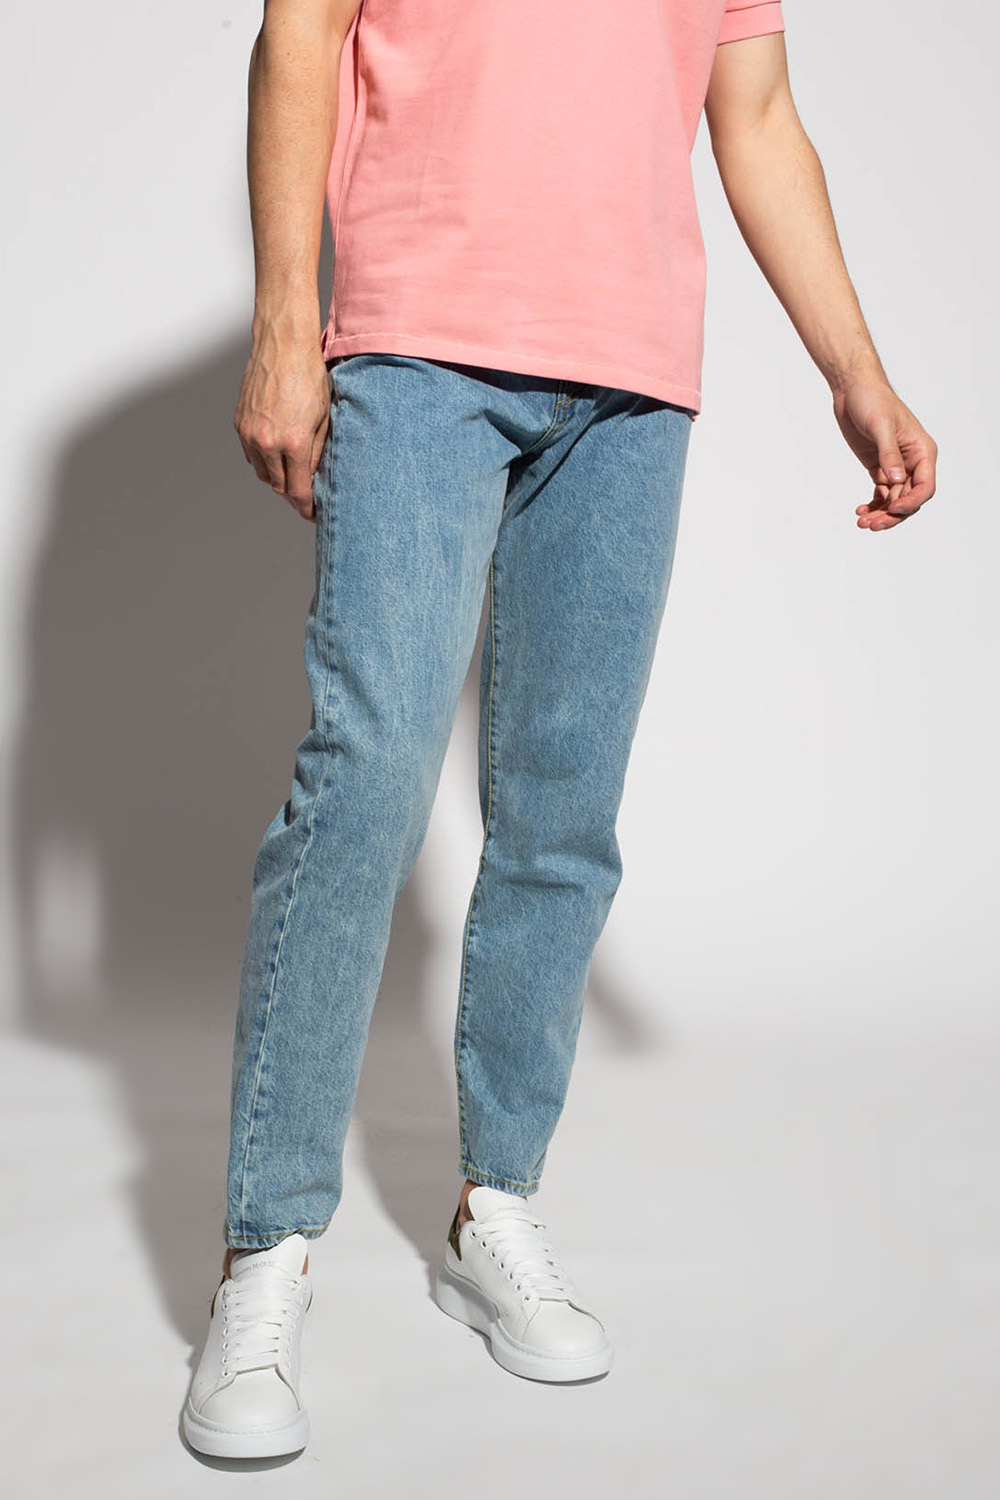 River Island floral ruched mini dress in pink Organic cotton jeans